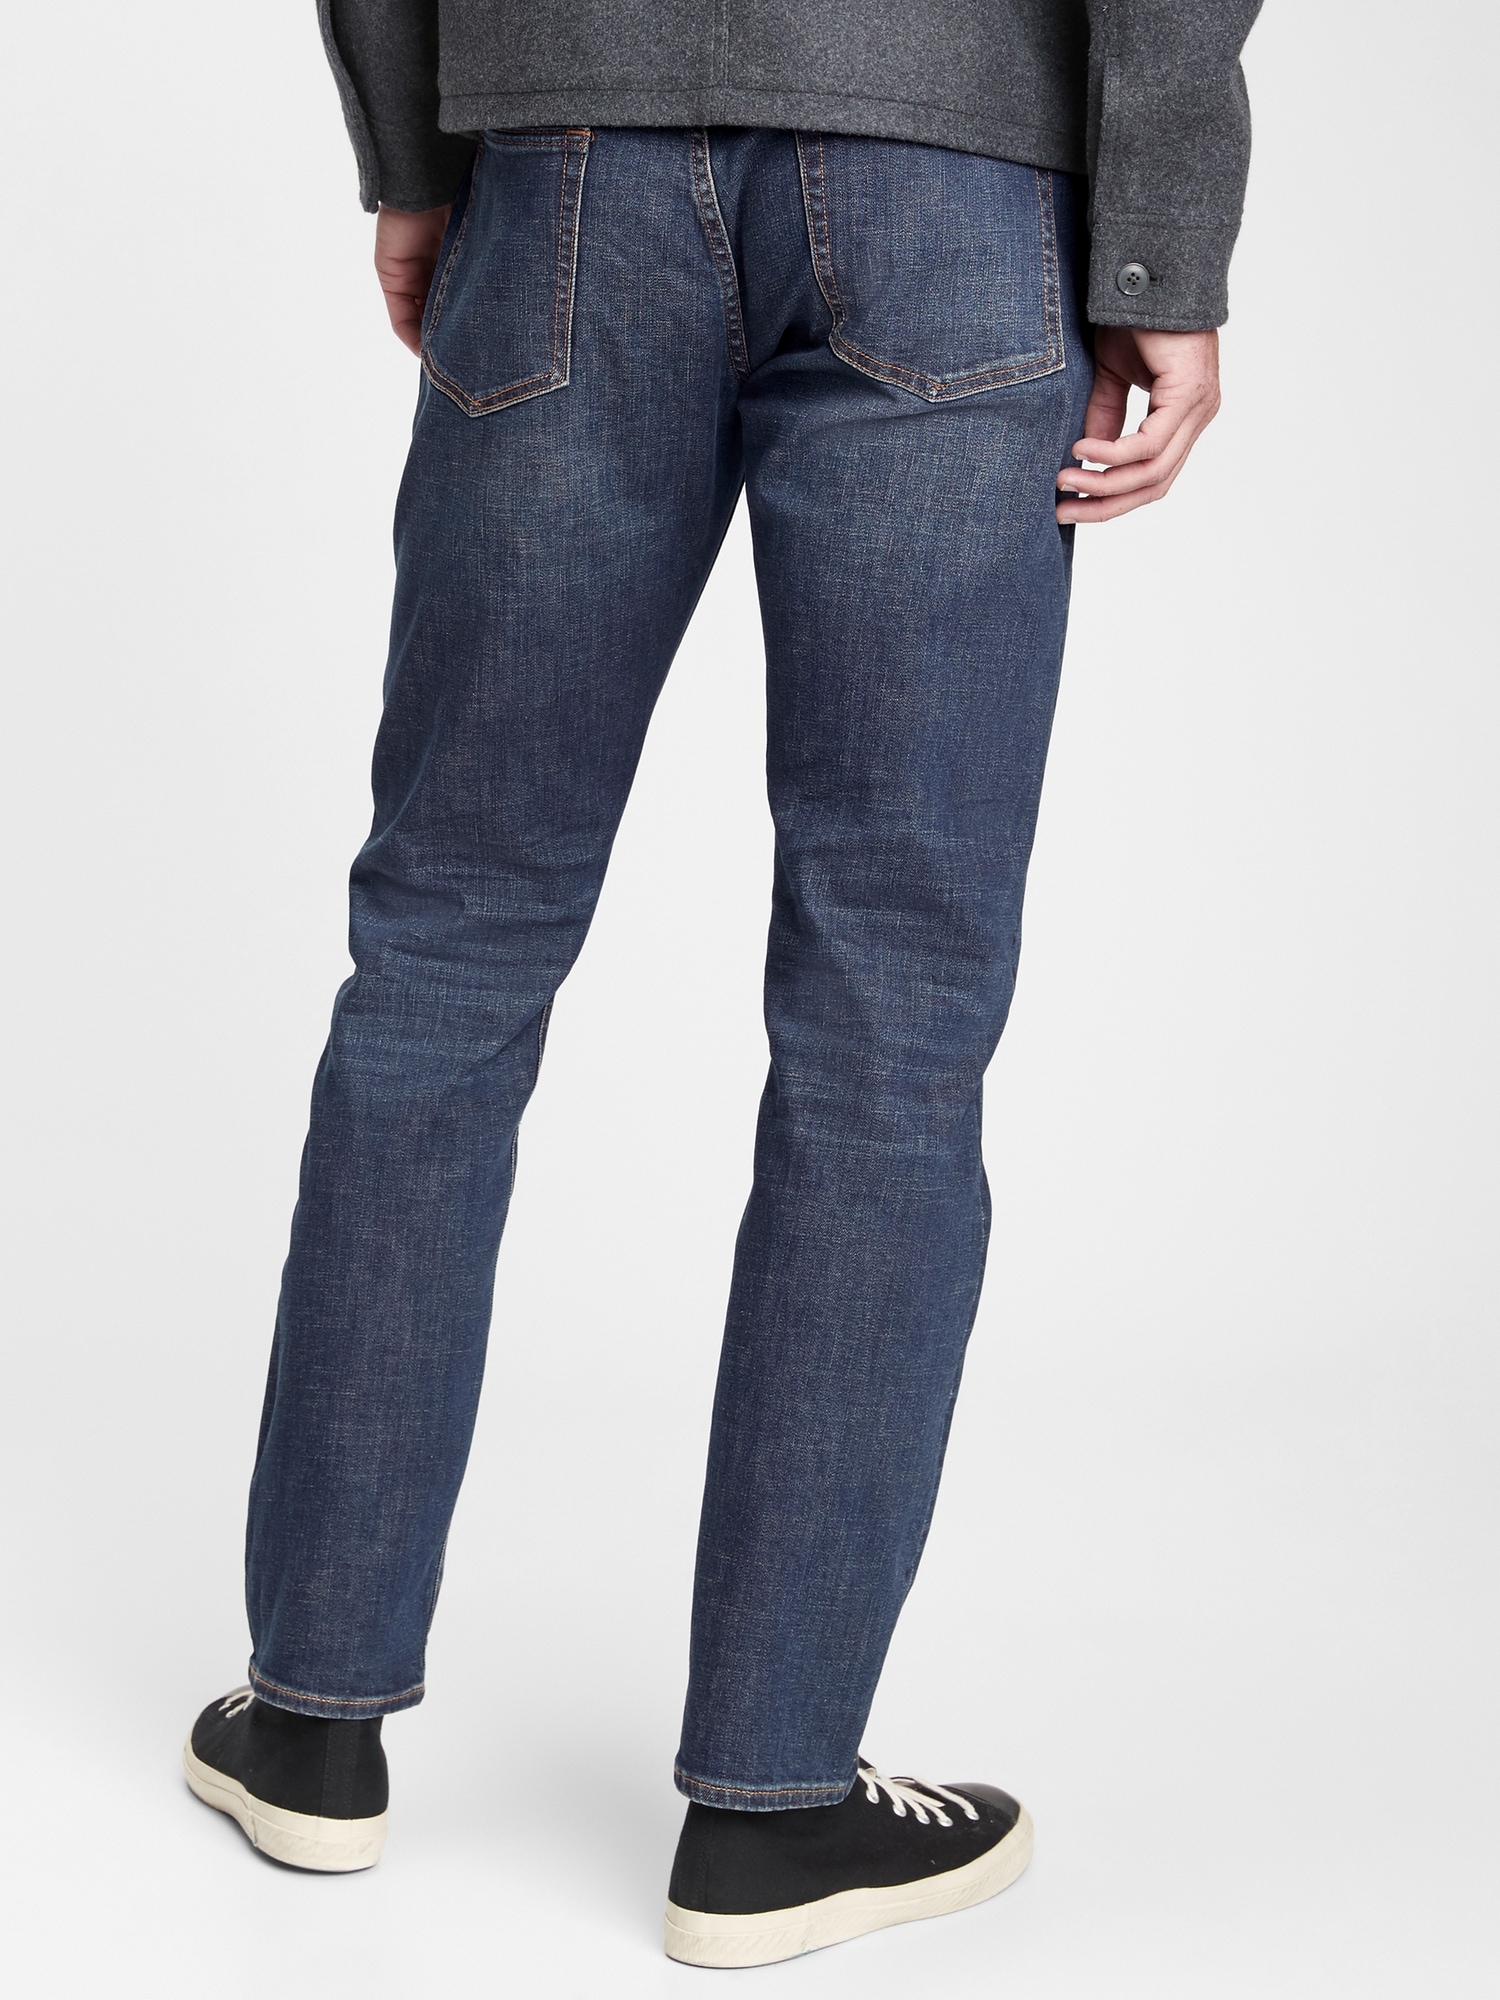 athletic taper fit jeans